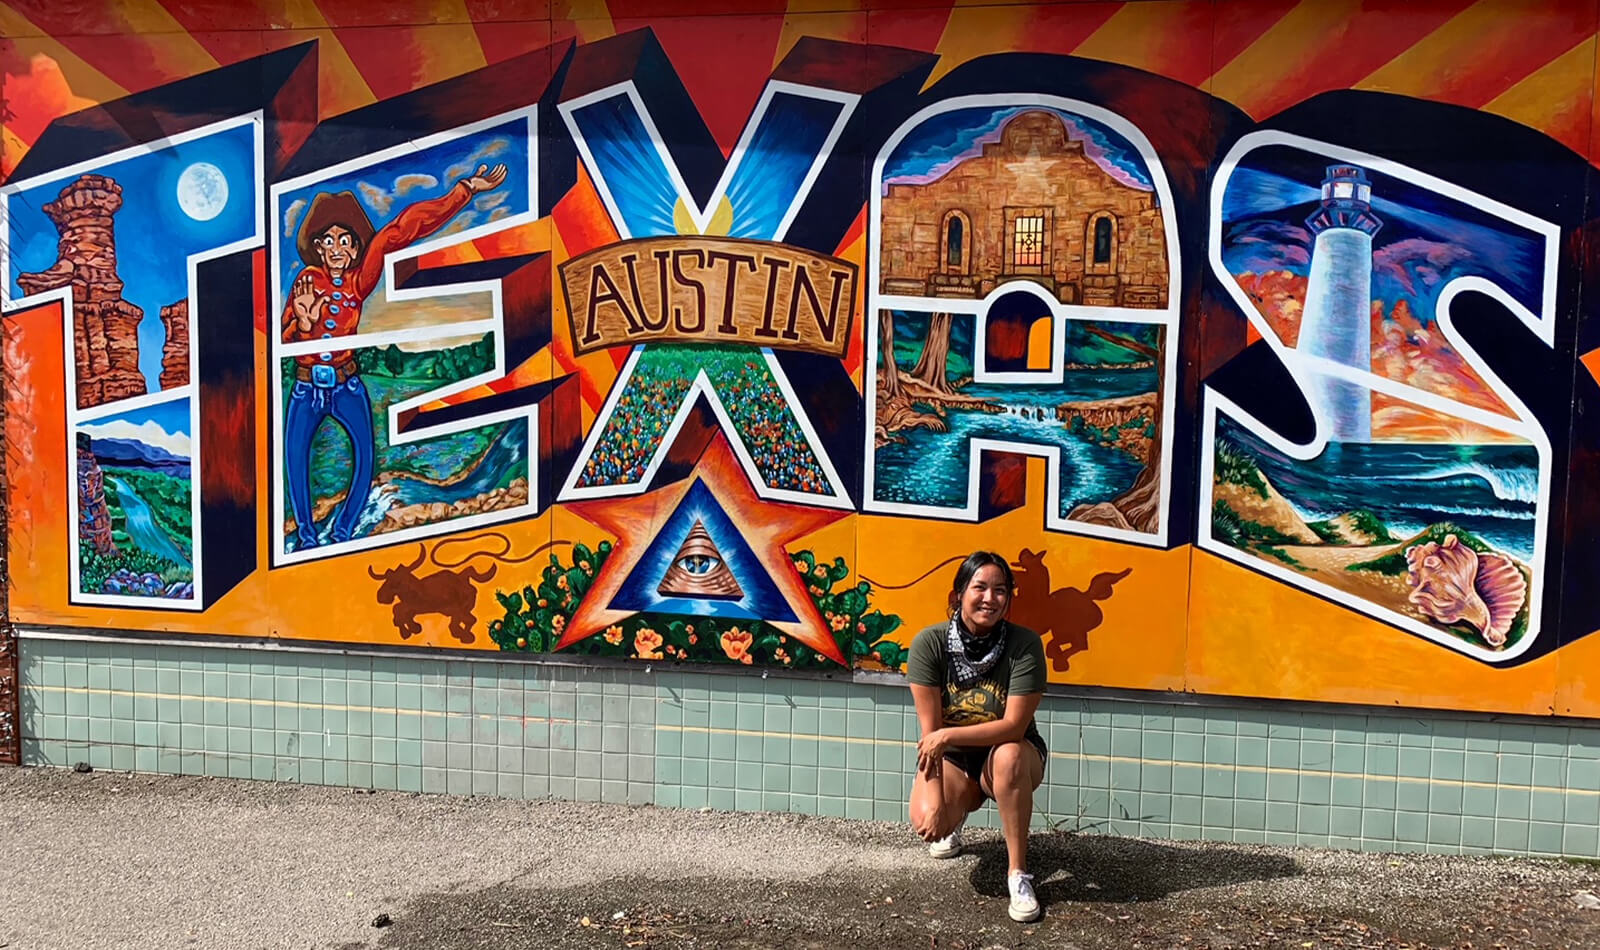 Julia posing in front of a painted mural in Austin, Texas.